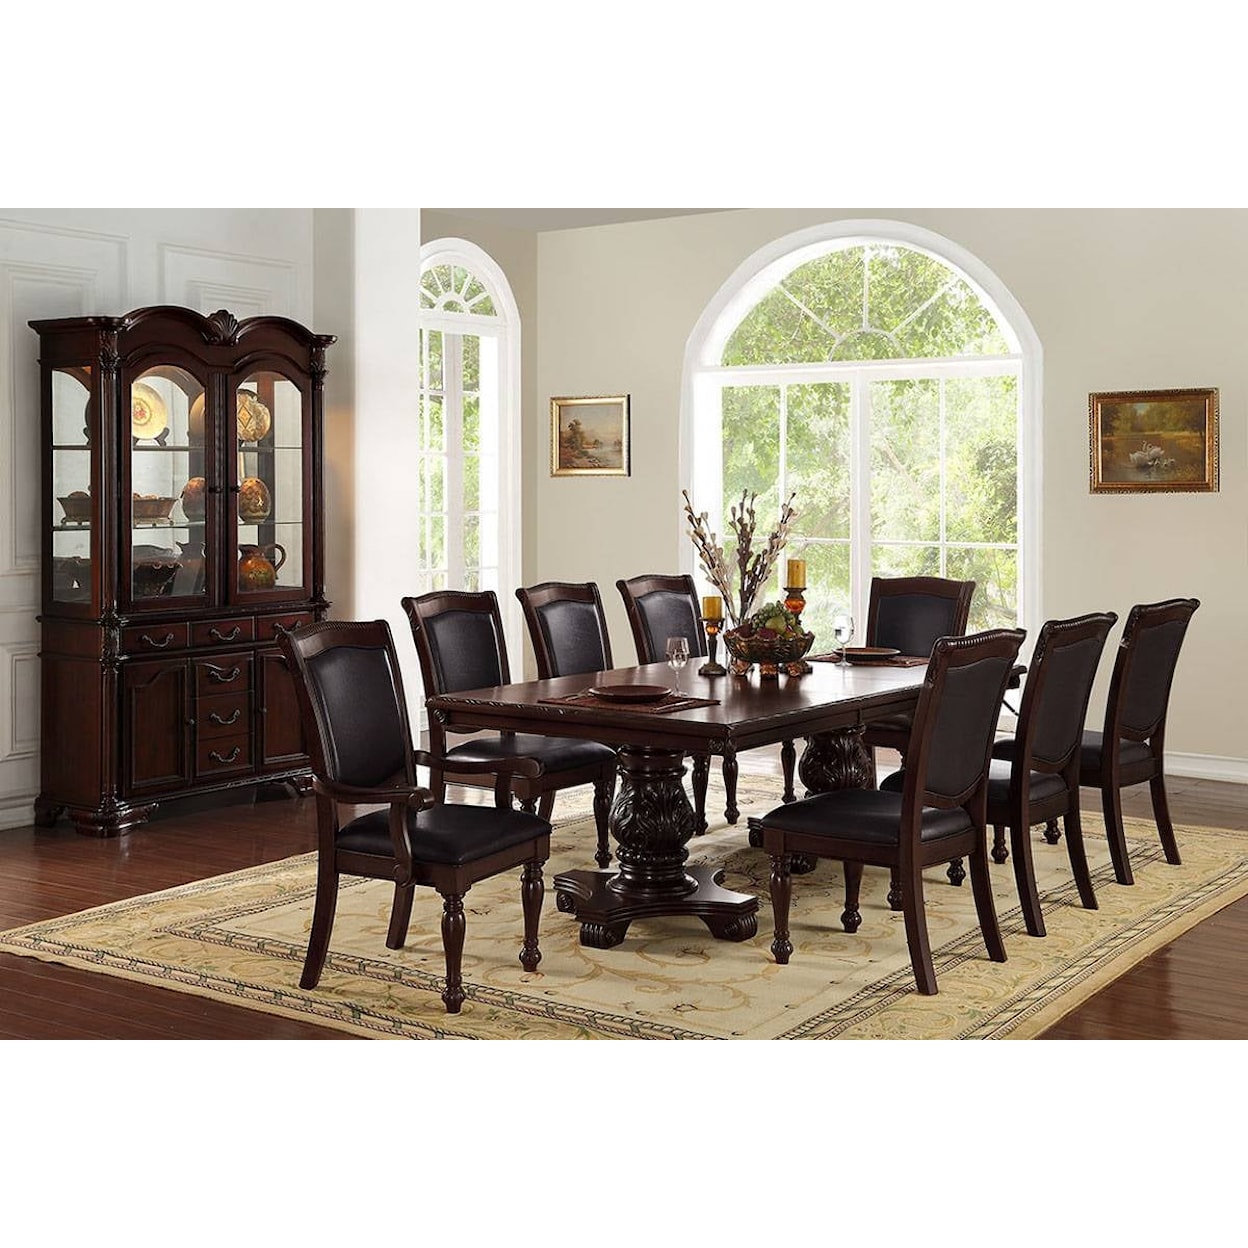 Poundex Fiona Dining Set FIONA DINING CHAIR |